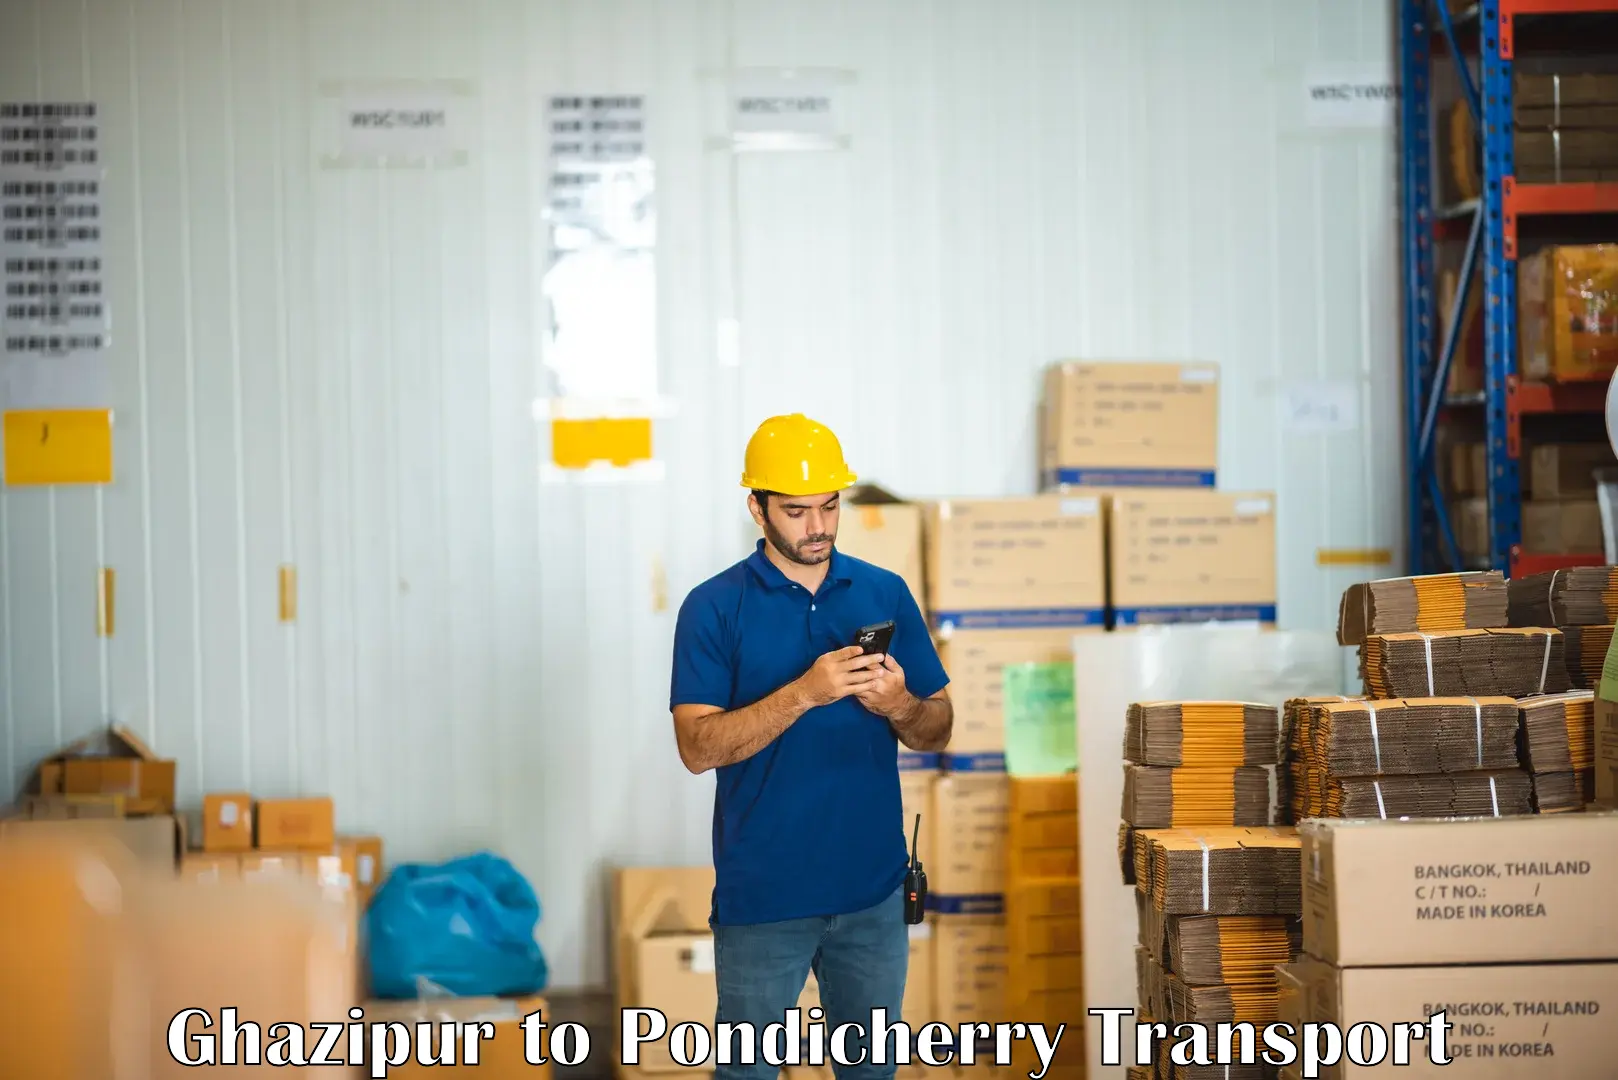 Container transport service Ghazipur to Pondicherry